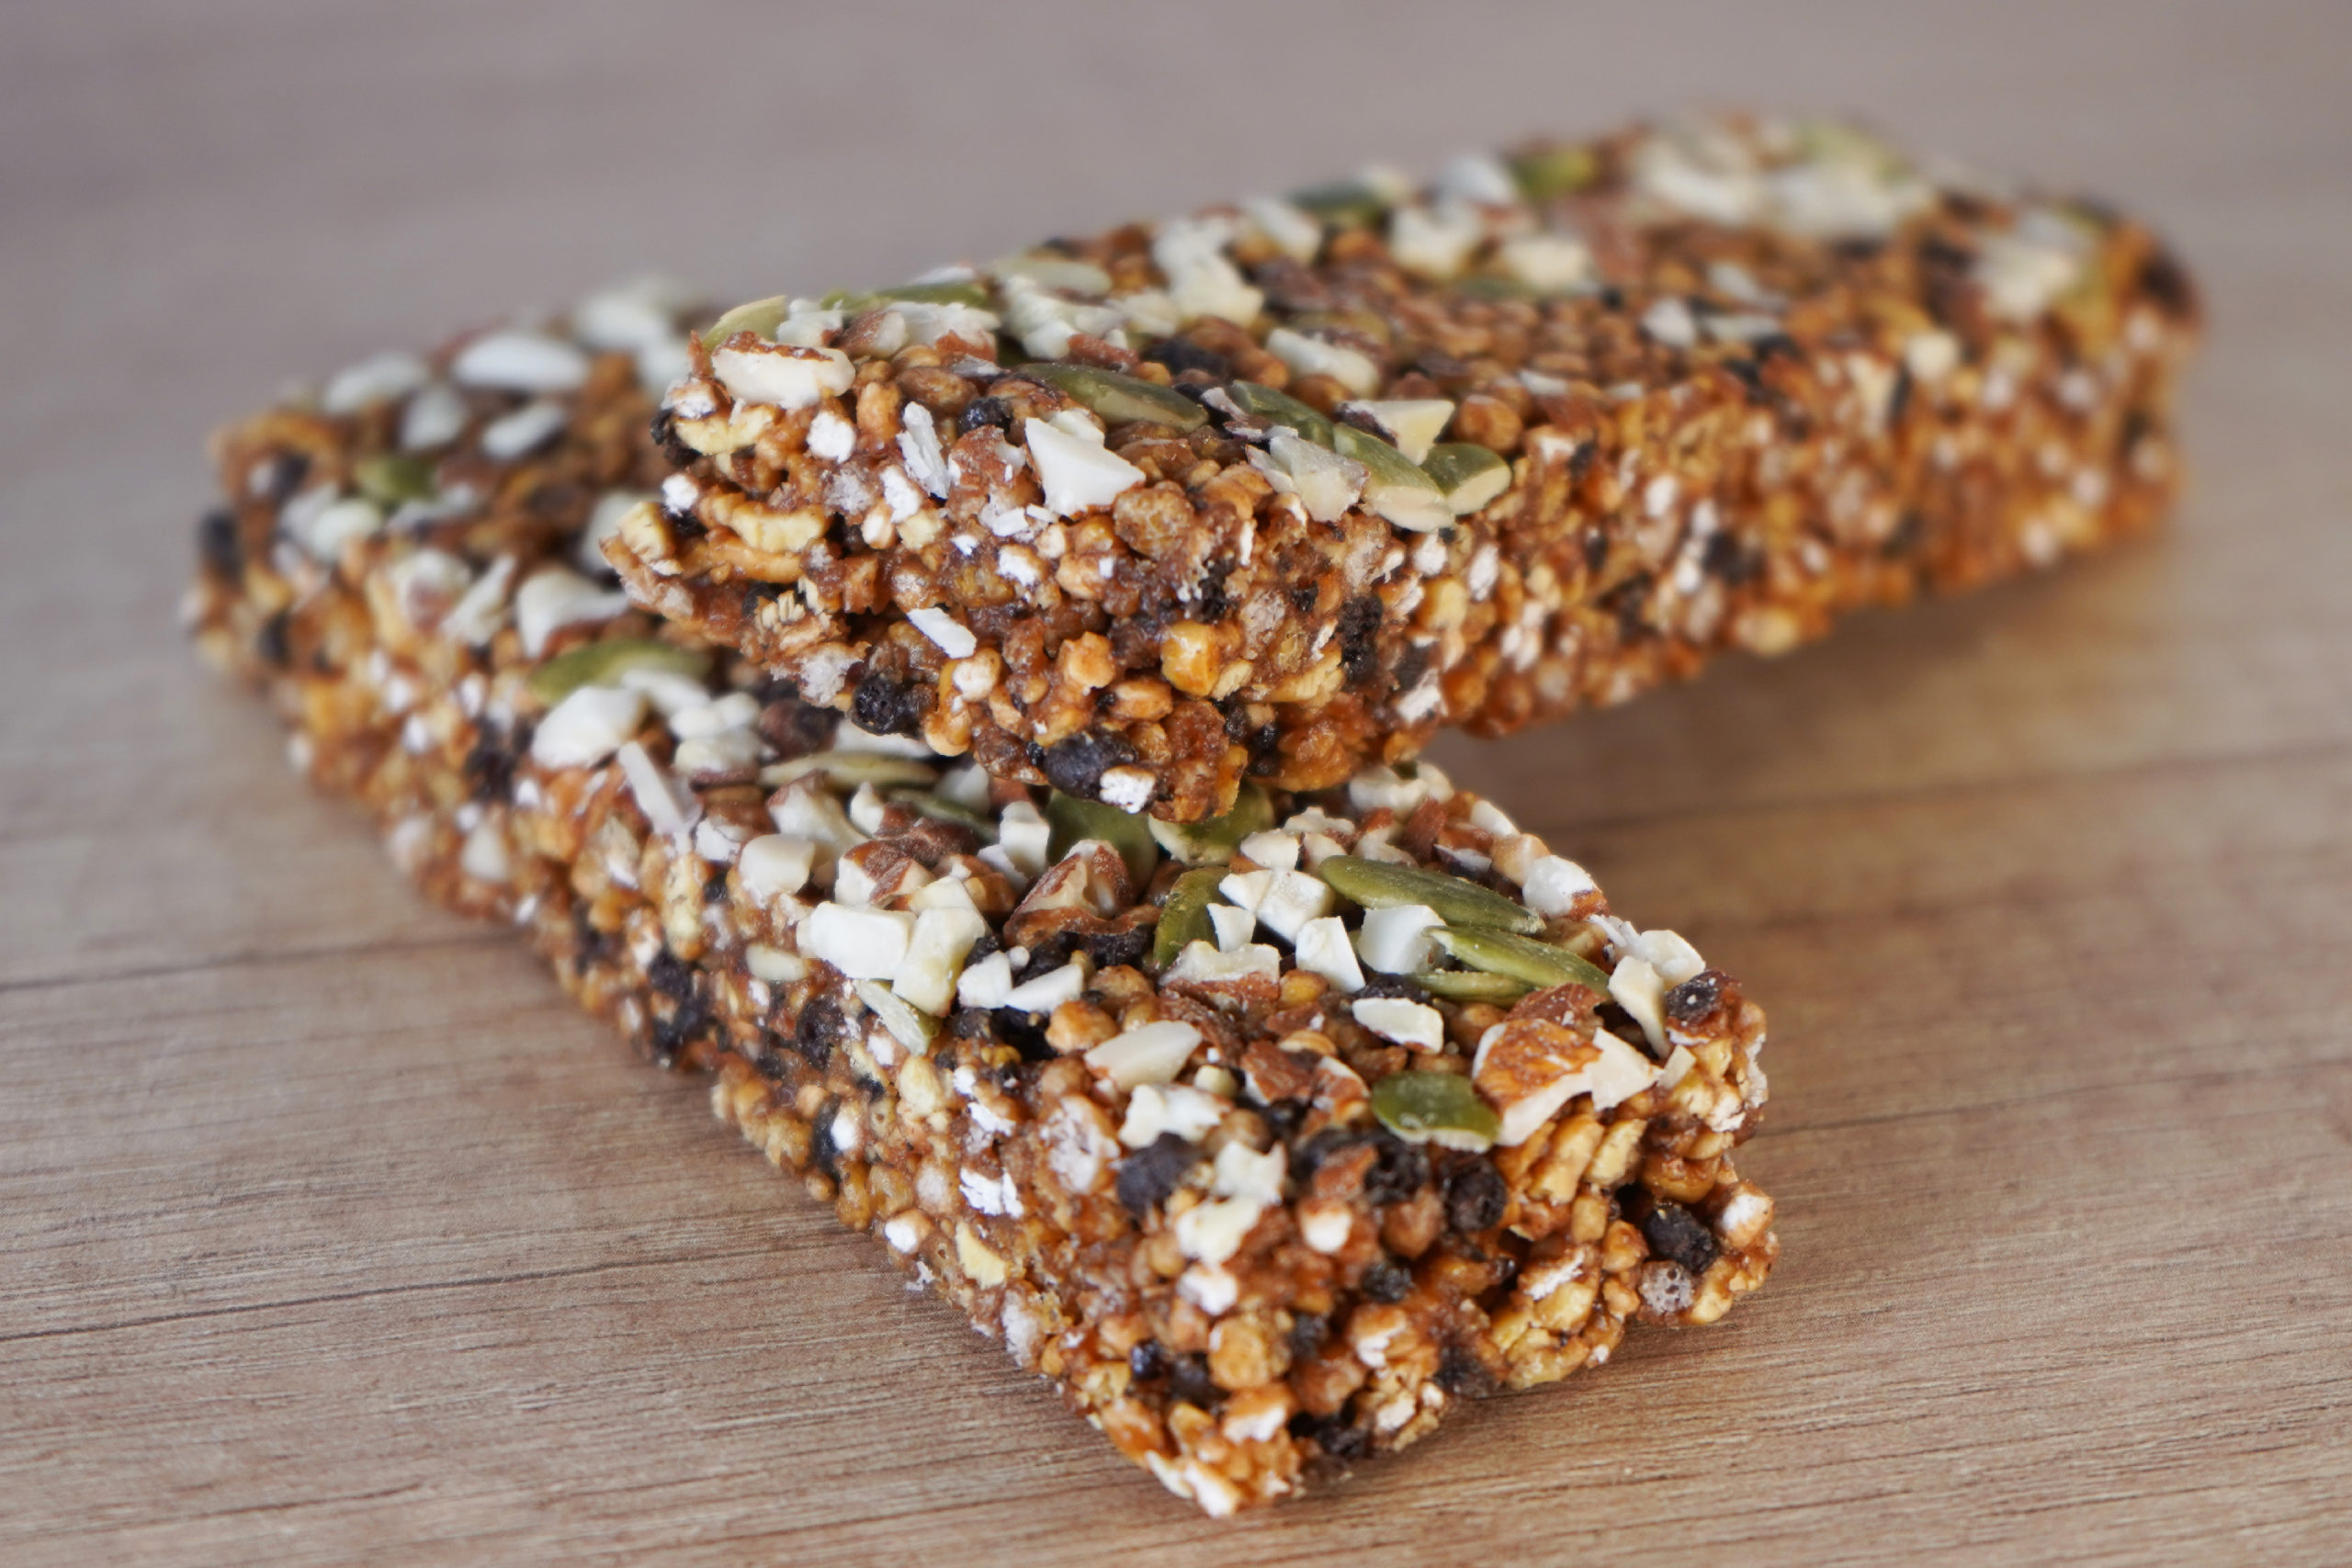 Meal replacement nut & seed bar